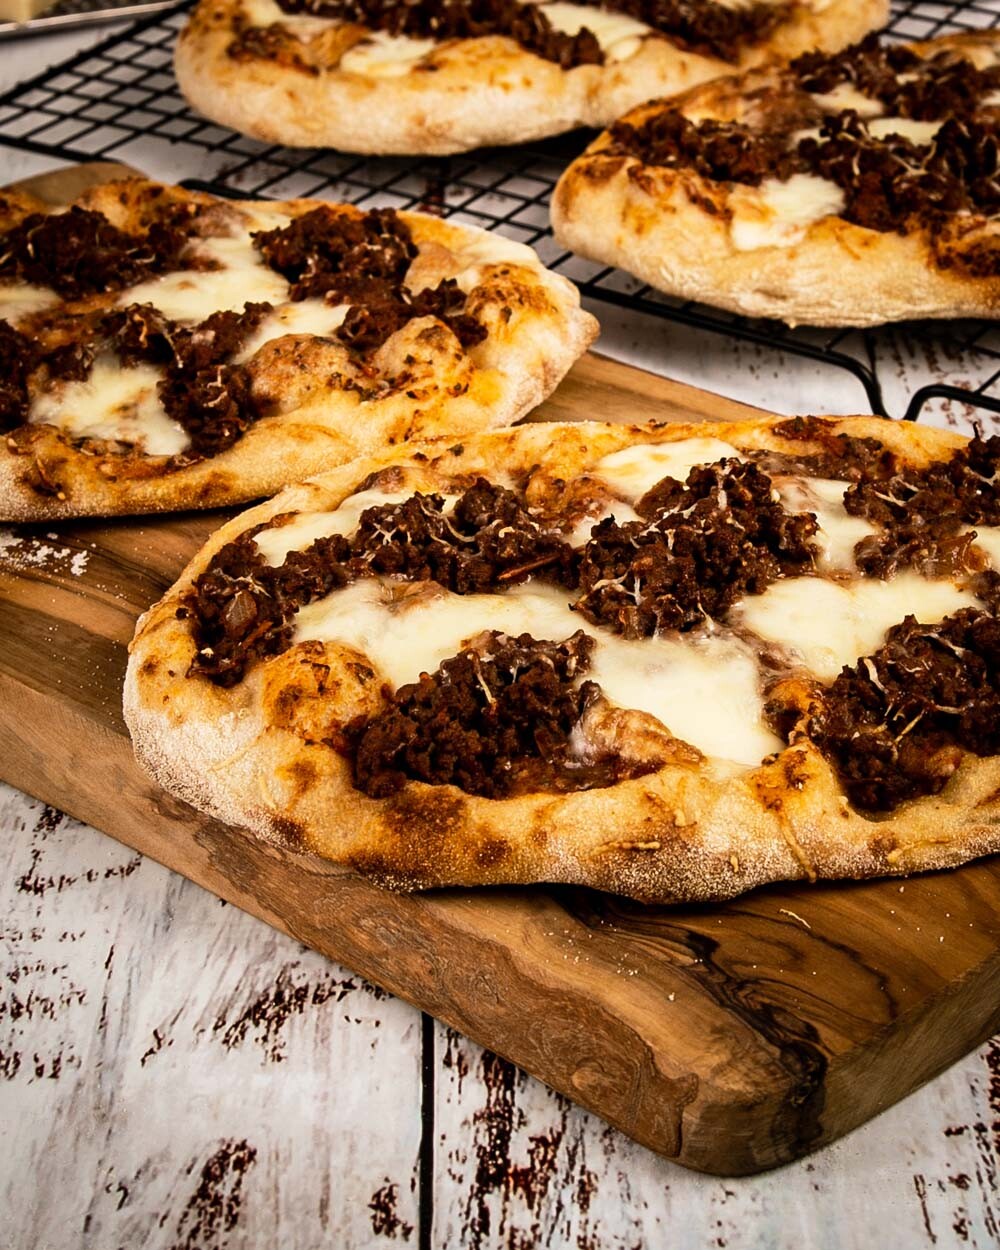 Side view of Roman pinsa pizzas with bolognese on a cutting board